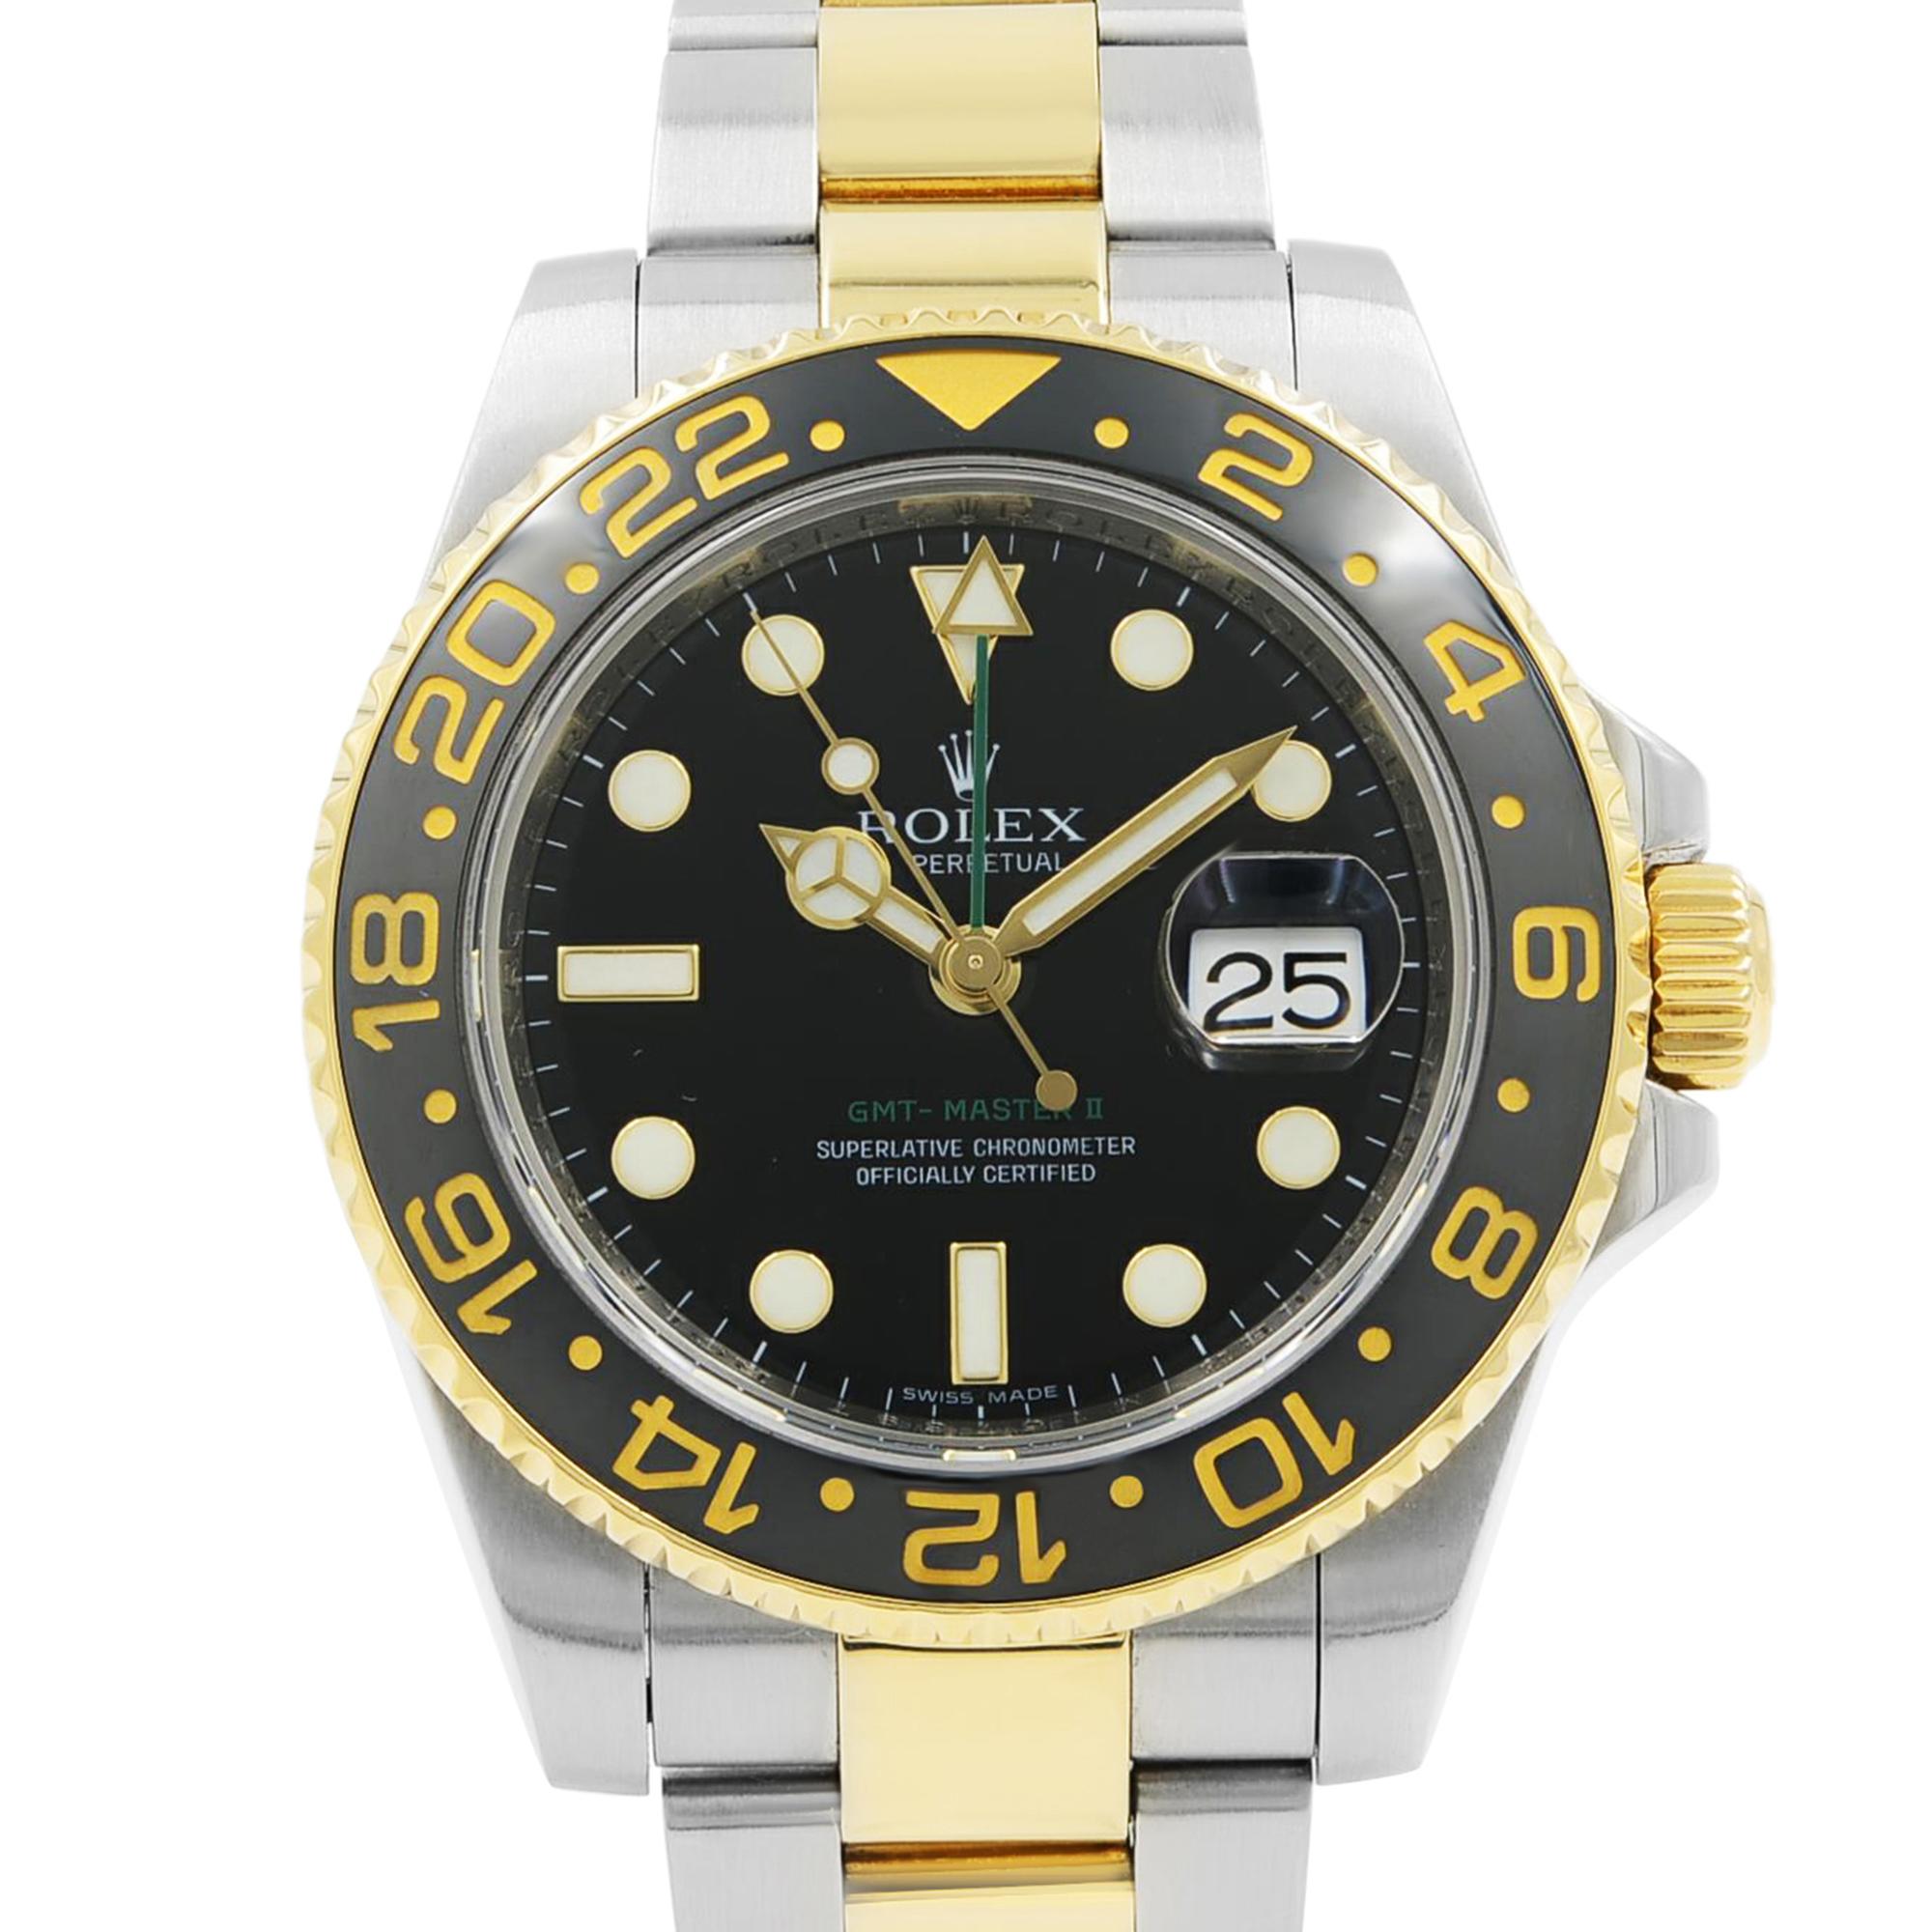 Pre-Owned Rolex GMT-Master II Steel Gold Black Dial Ceramic Bezel Men's Watch 116713LN. Fits only wrist size 7.25 Inch. Original Box and Papers are included Covered by a one-year Chronostore warranty.
Details:
Brand Rolex
Department Men
Model Number